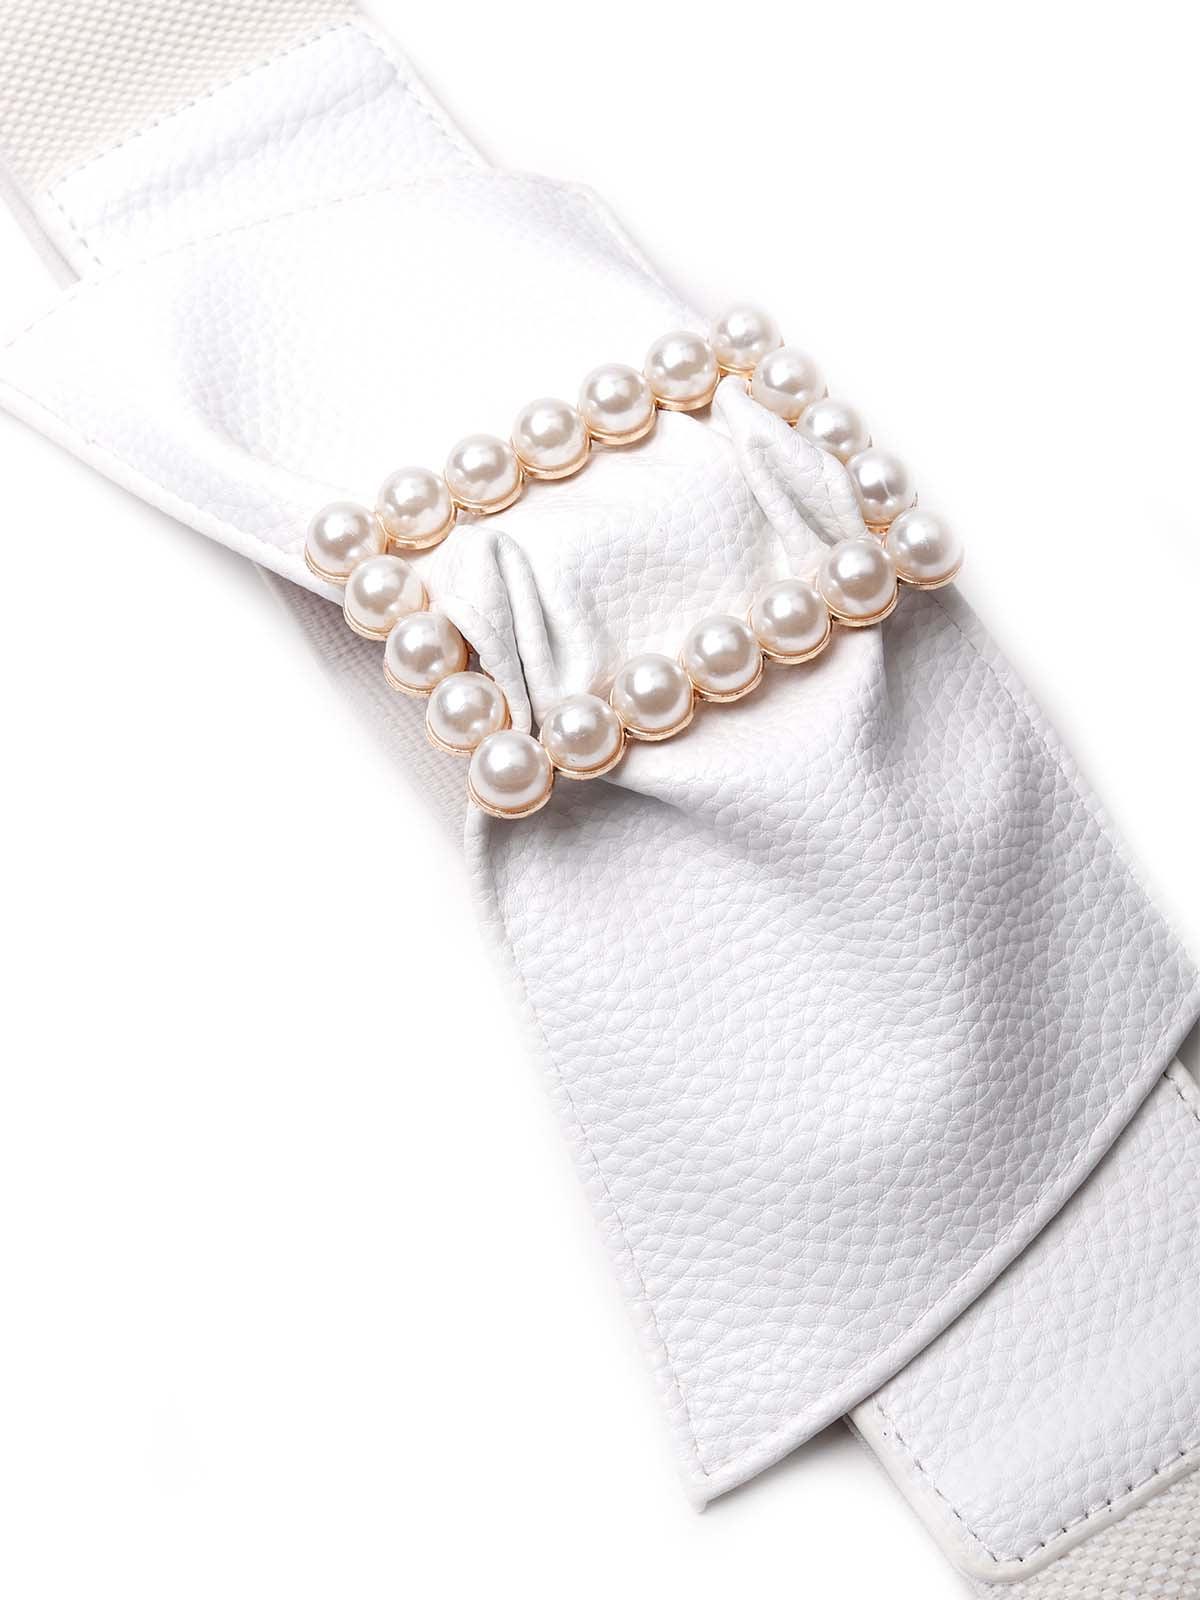 Stylish white waist belt studded with artifical pearls - Odette